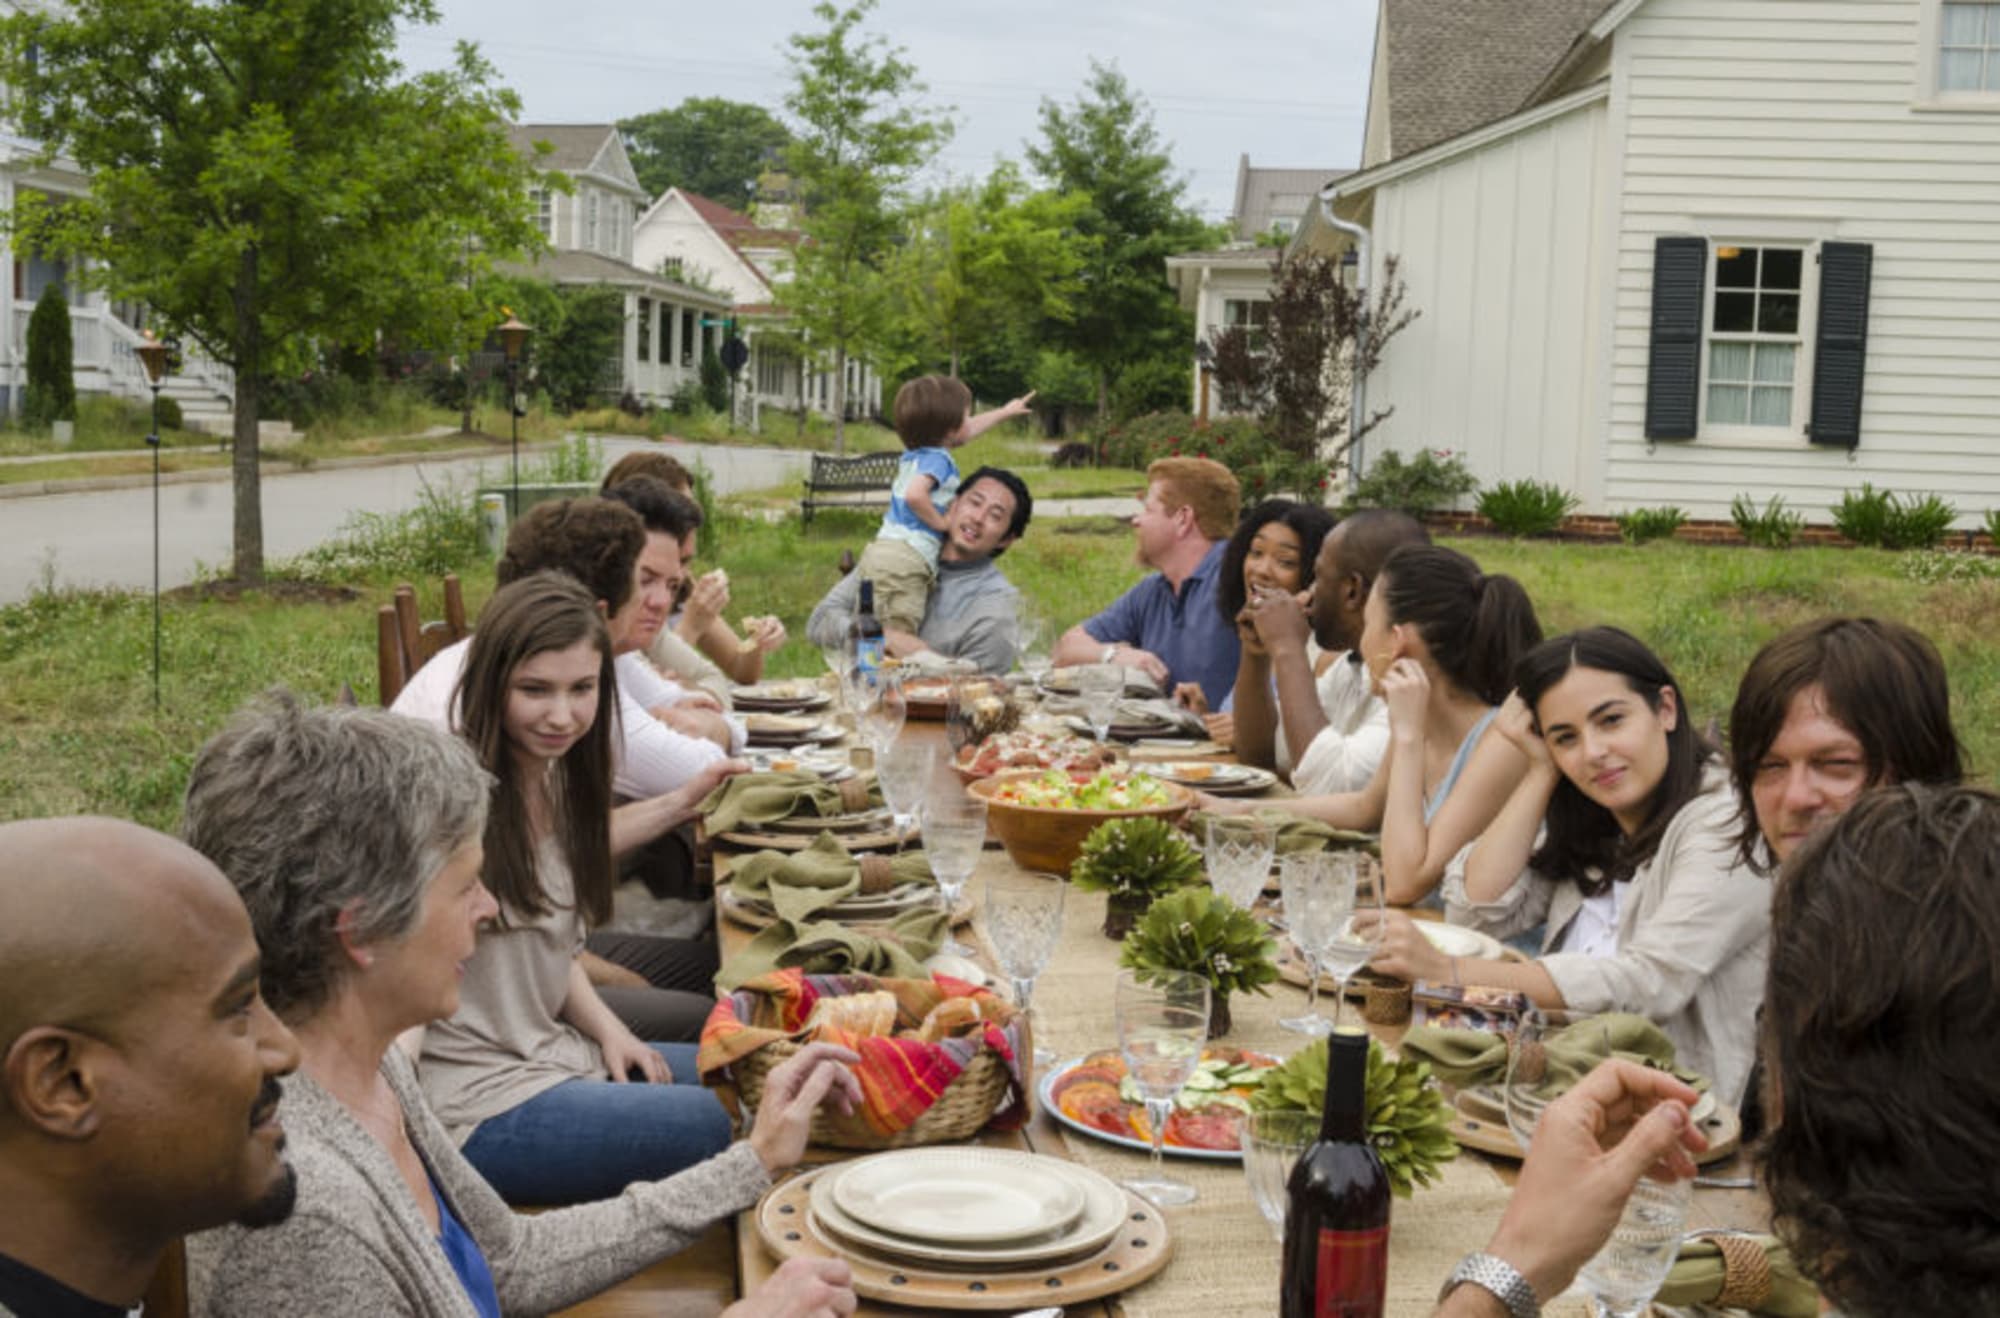 An imaginary Thanksgiving meal with The Walking Dead family-with recipes